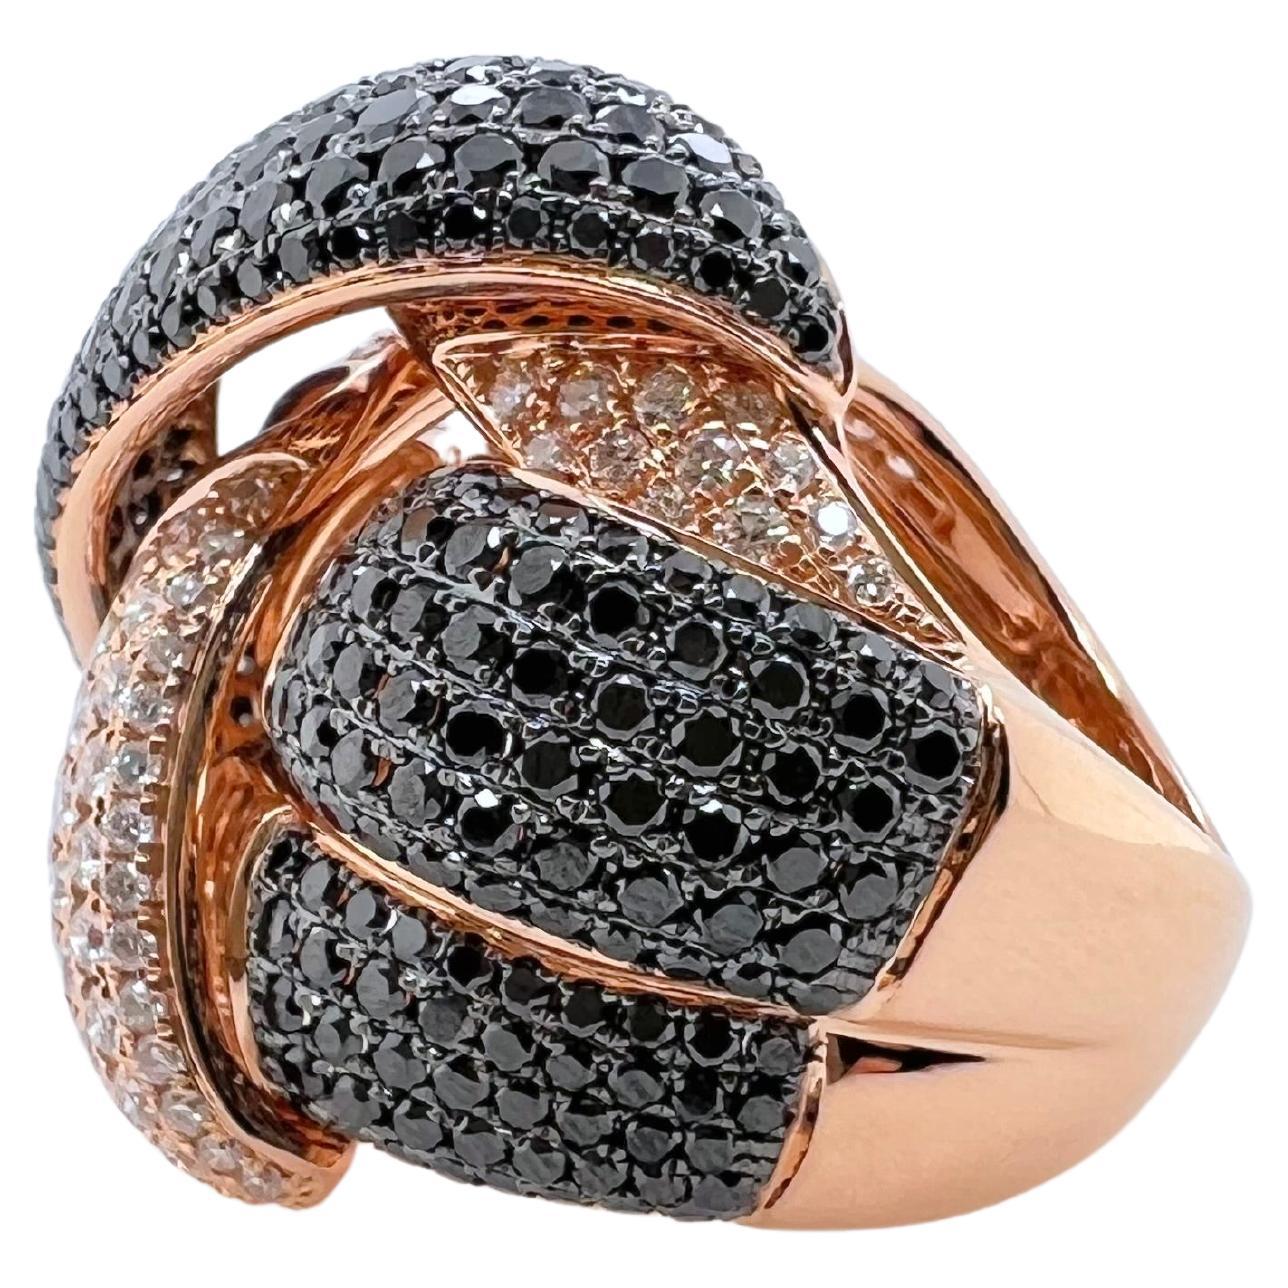 This chunky style diamond knot ring is stunning and a statement piece! The contrast of the black diamonds against the white diamonds in the rose gold really sets it apart from the rest of the basic knot rings in the world!




Ring Size: 7 (can be